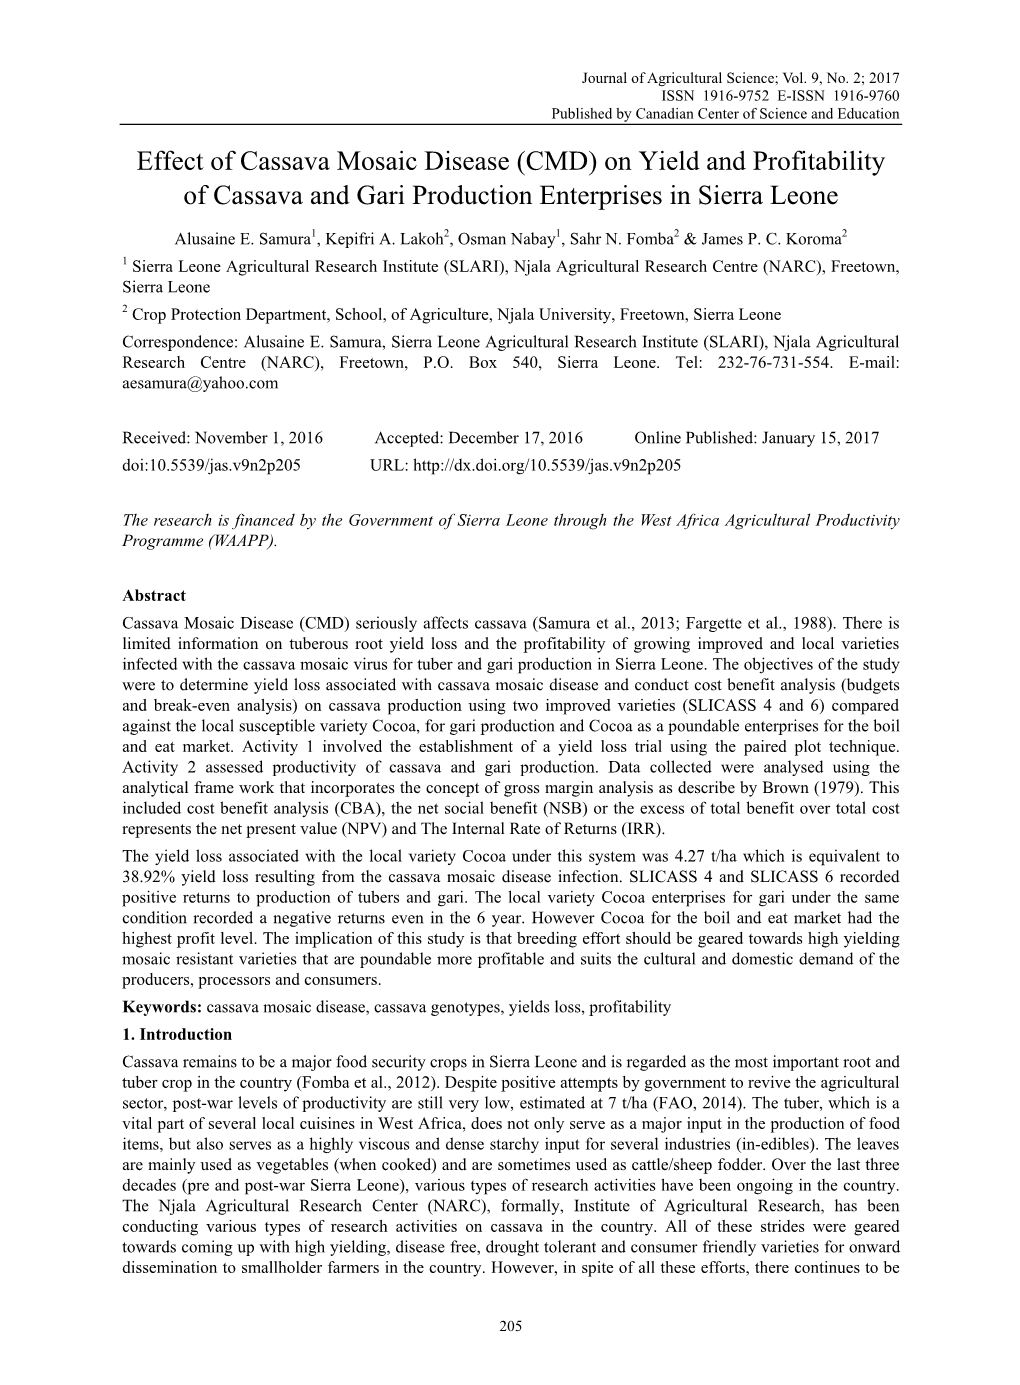 On Yield and Profitability of Cassava and Gari Production Enterprises in Sierra Leone